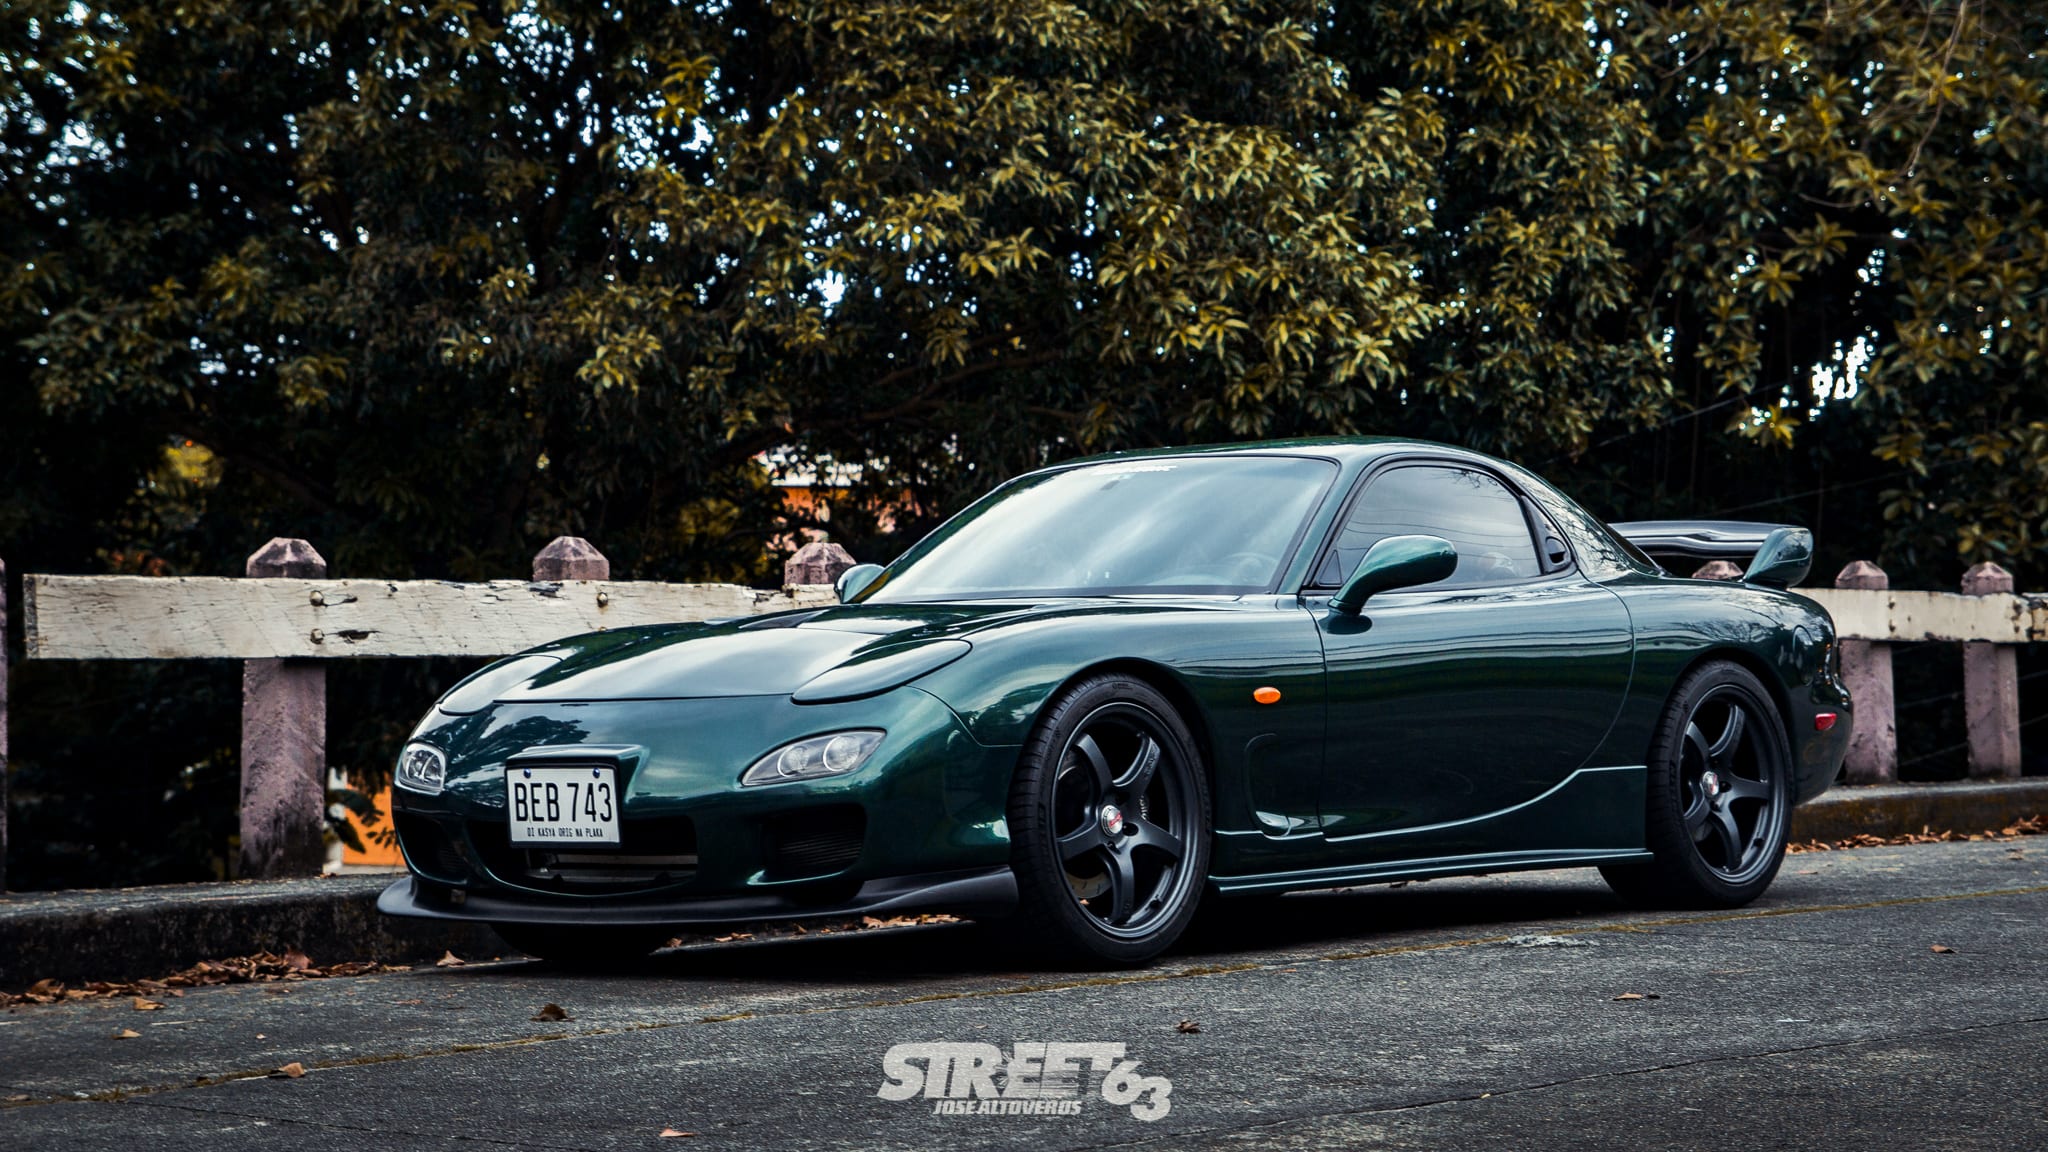 **Staff Projects:** The Dream of Owning an RX-7